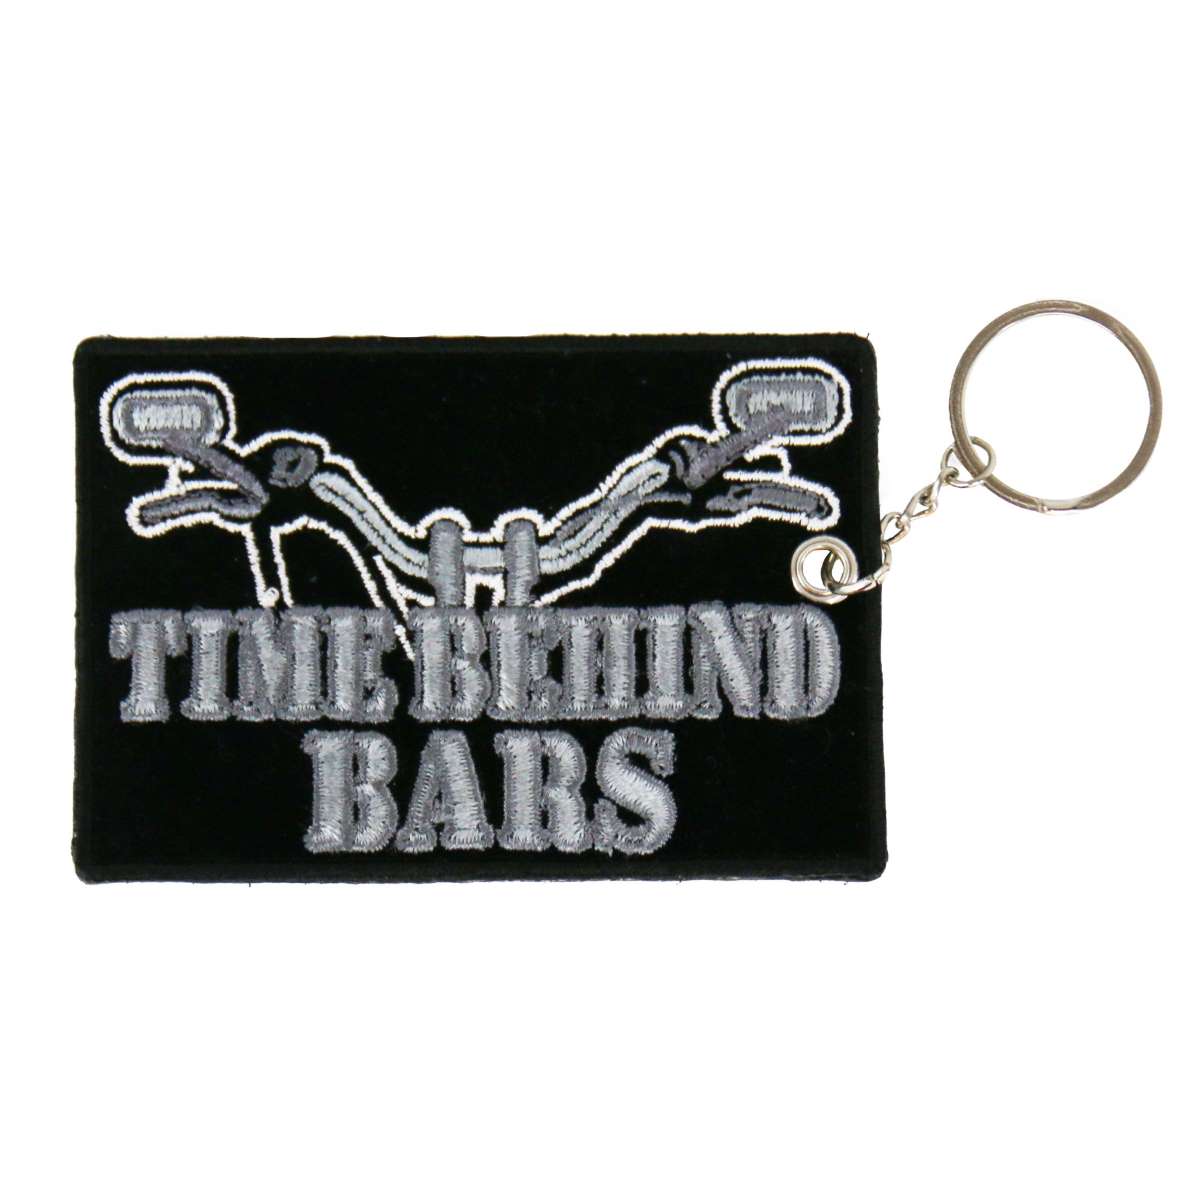 Hot Leathers Time Behind Bars Embroidered Key Chain KCH1028